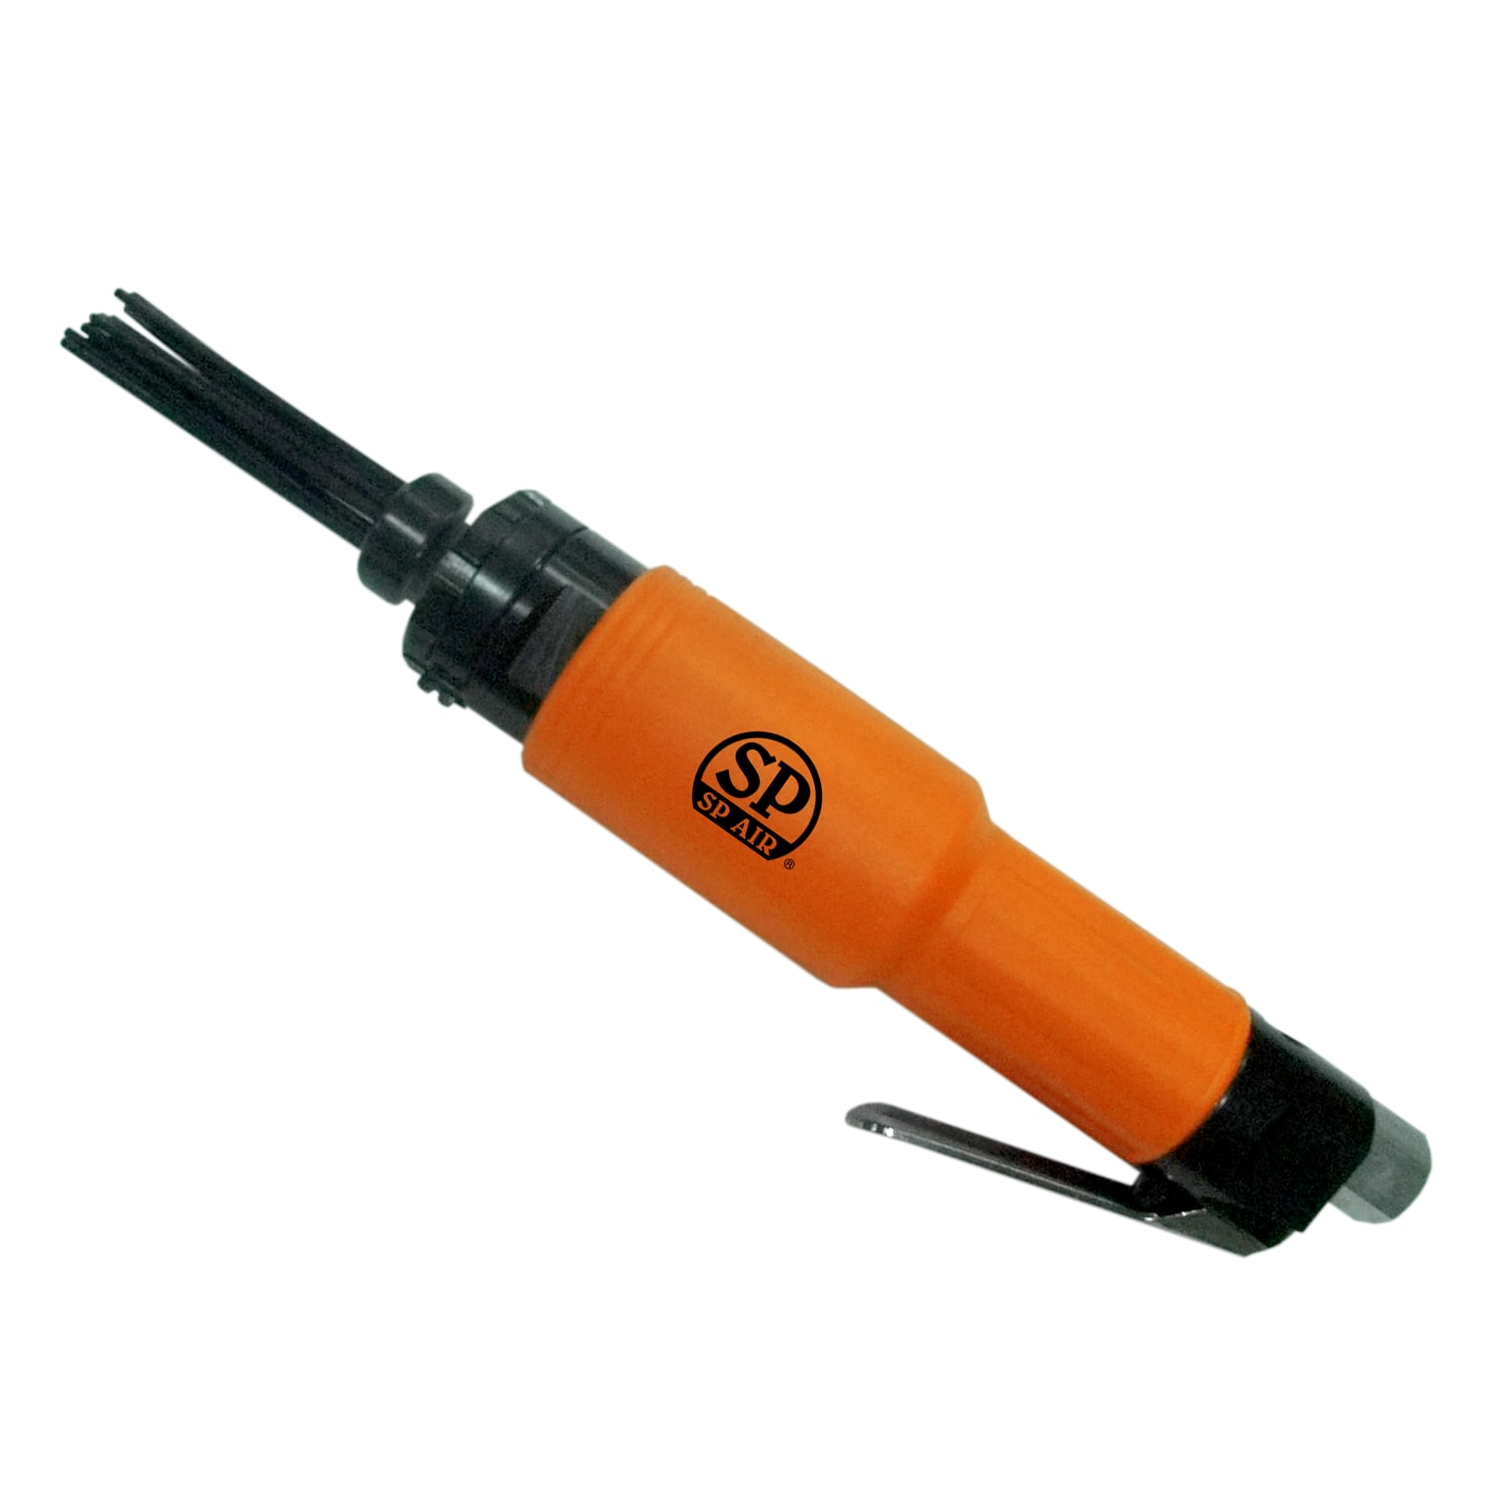 Heavy Duty Air / Pneumatic Needle Scaler Composite with Straight Grip SP-2472 by SP Tools